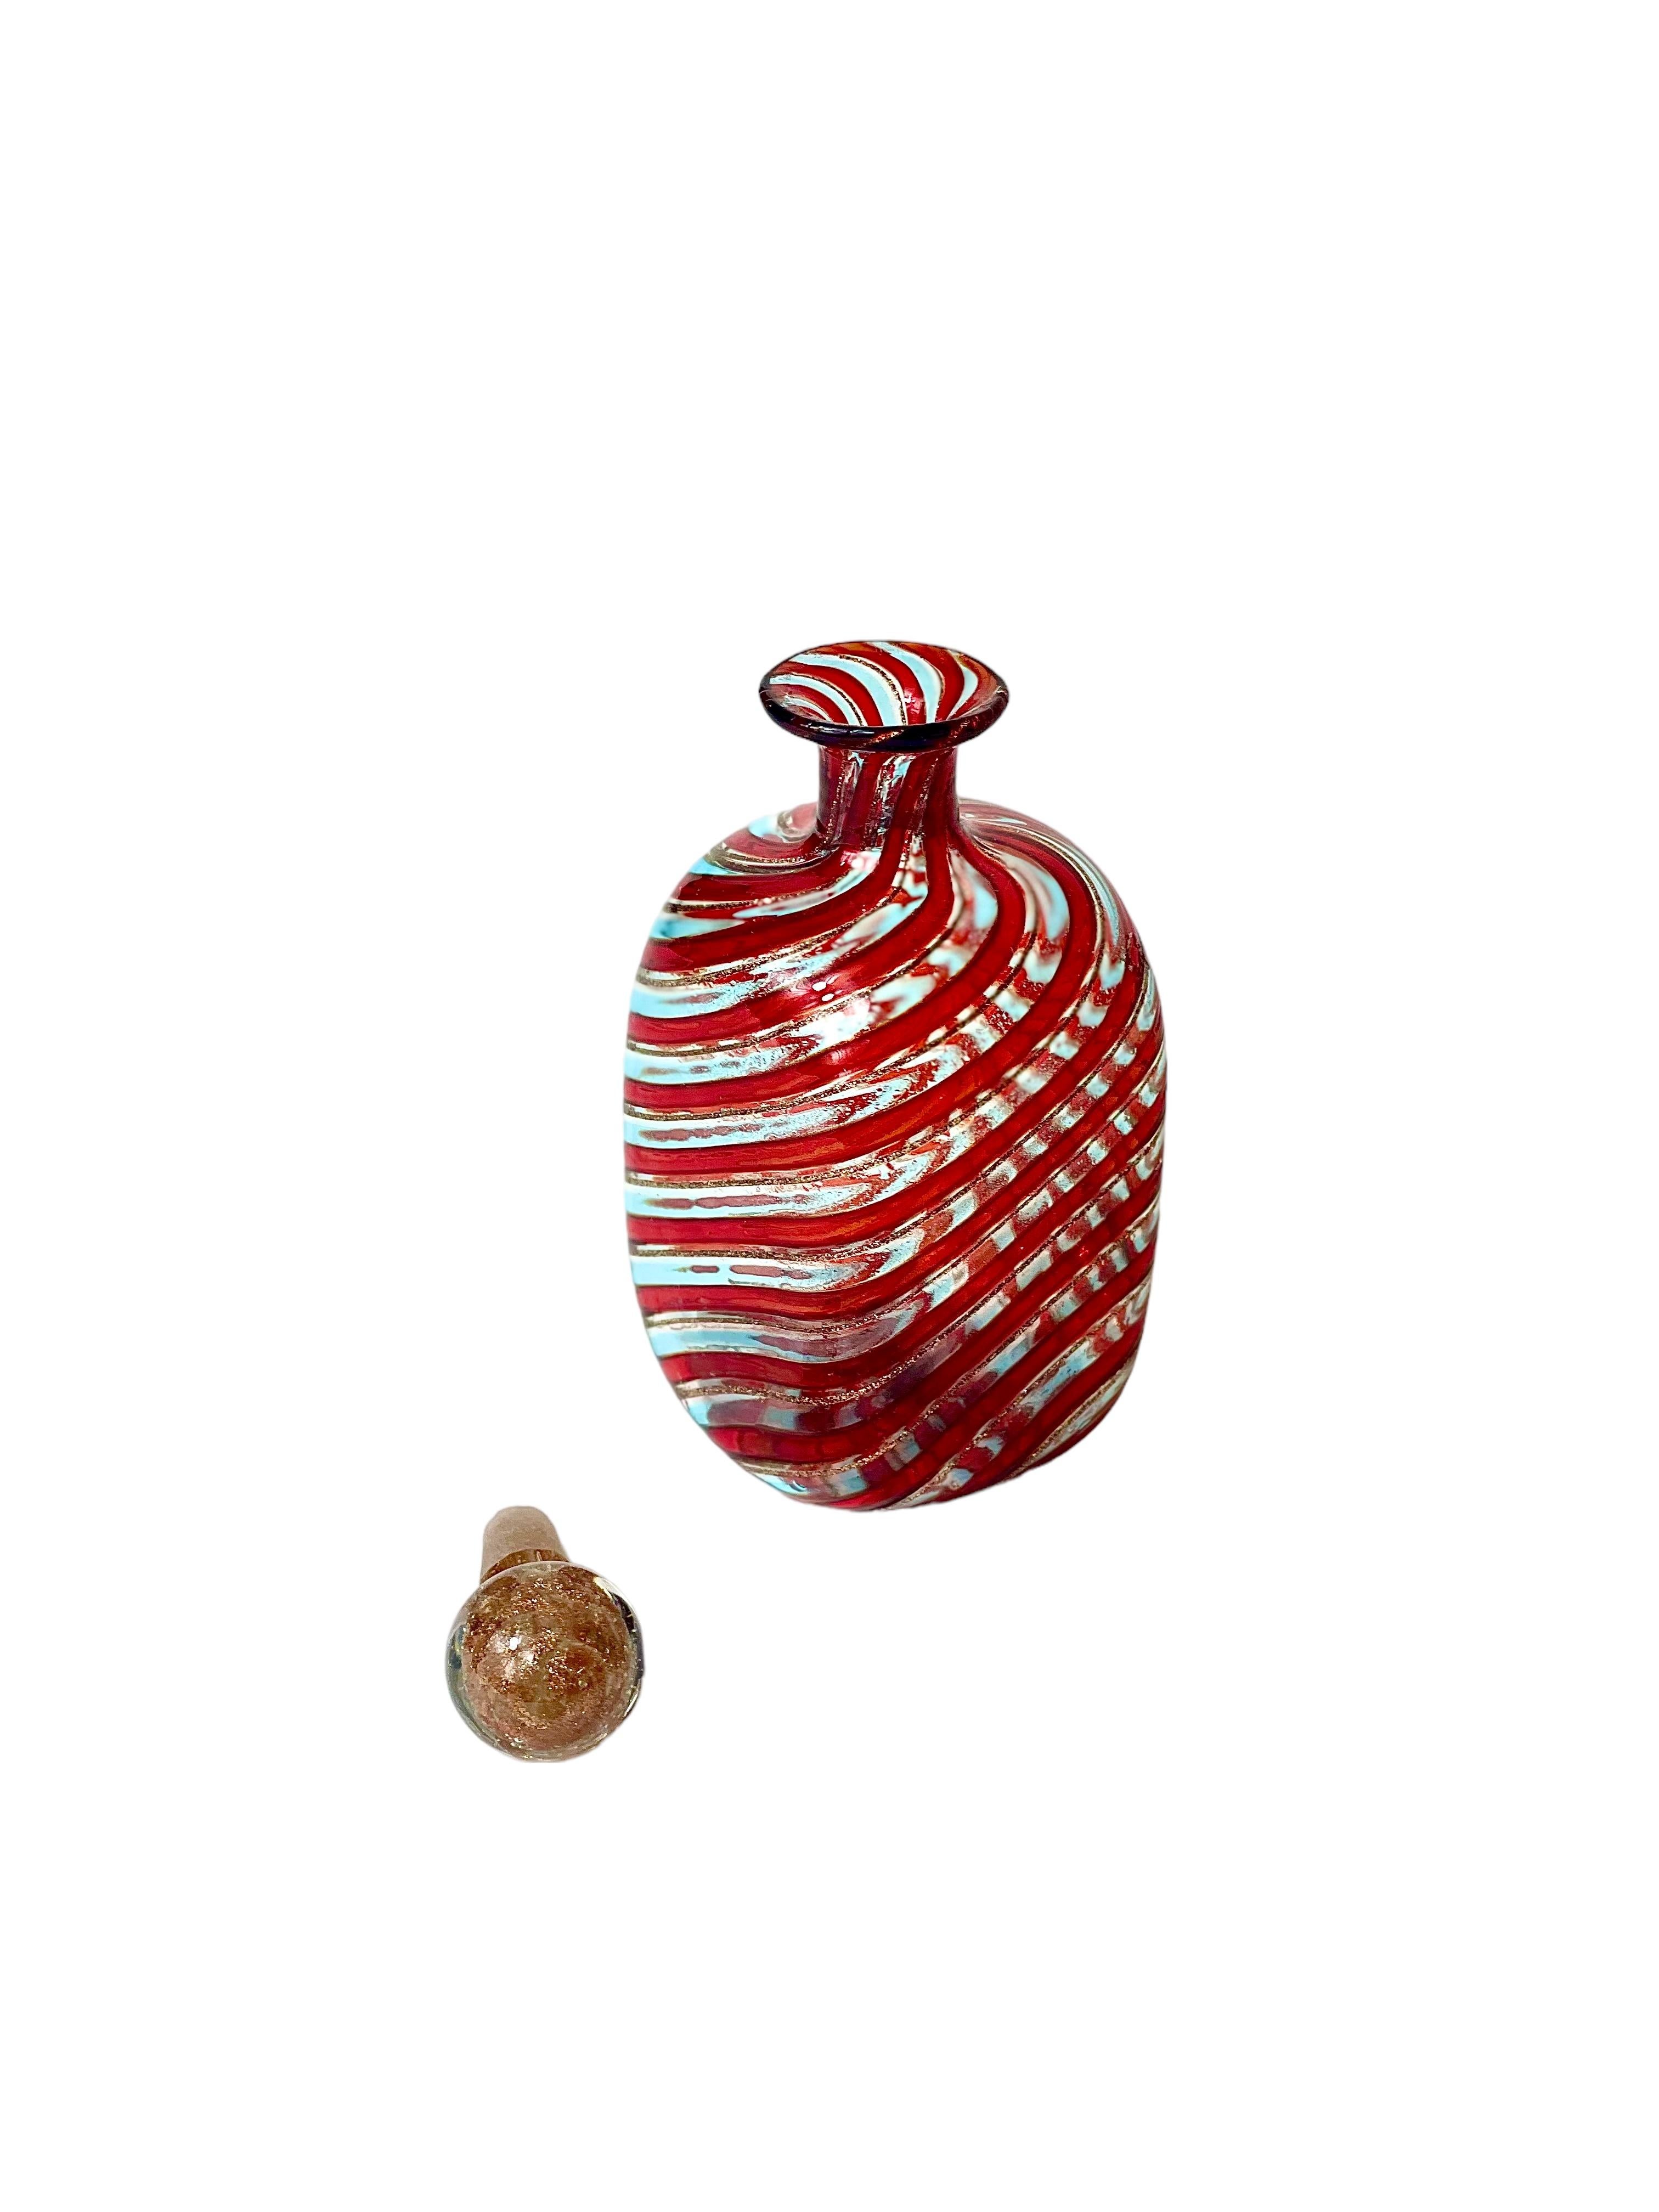 A very pretty vintage Italian perfume bottle, in Murano glass, featuring a striking cranberry and clear diagonal swirl pattern all around. The petite bottle is topped with its original spherical stopper, and the scent dauber is still present and